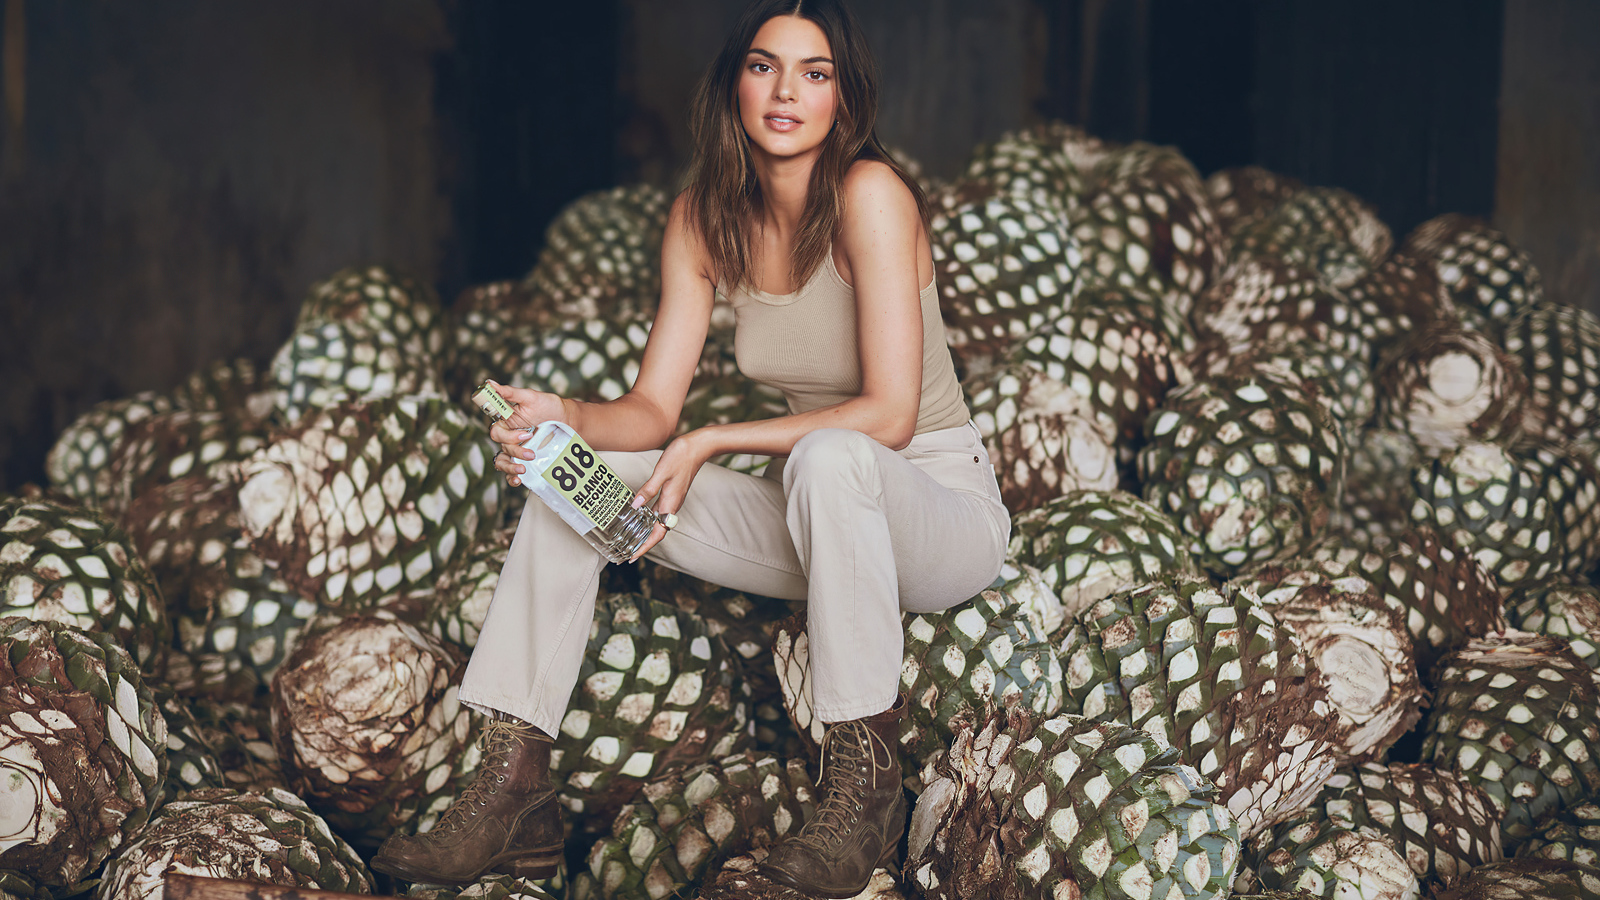 Model Kendall Jenner with a bottle in her hand